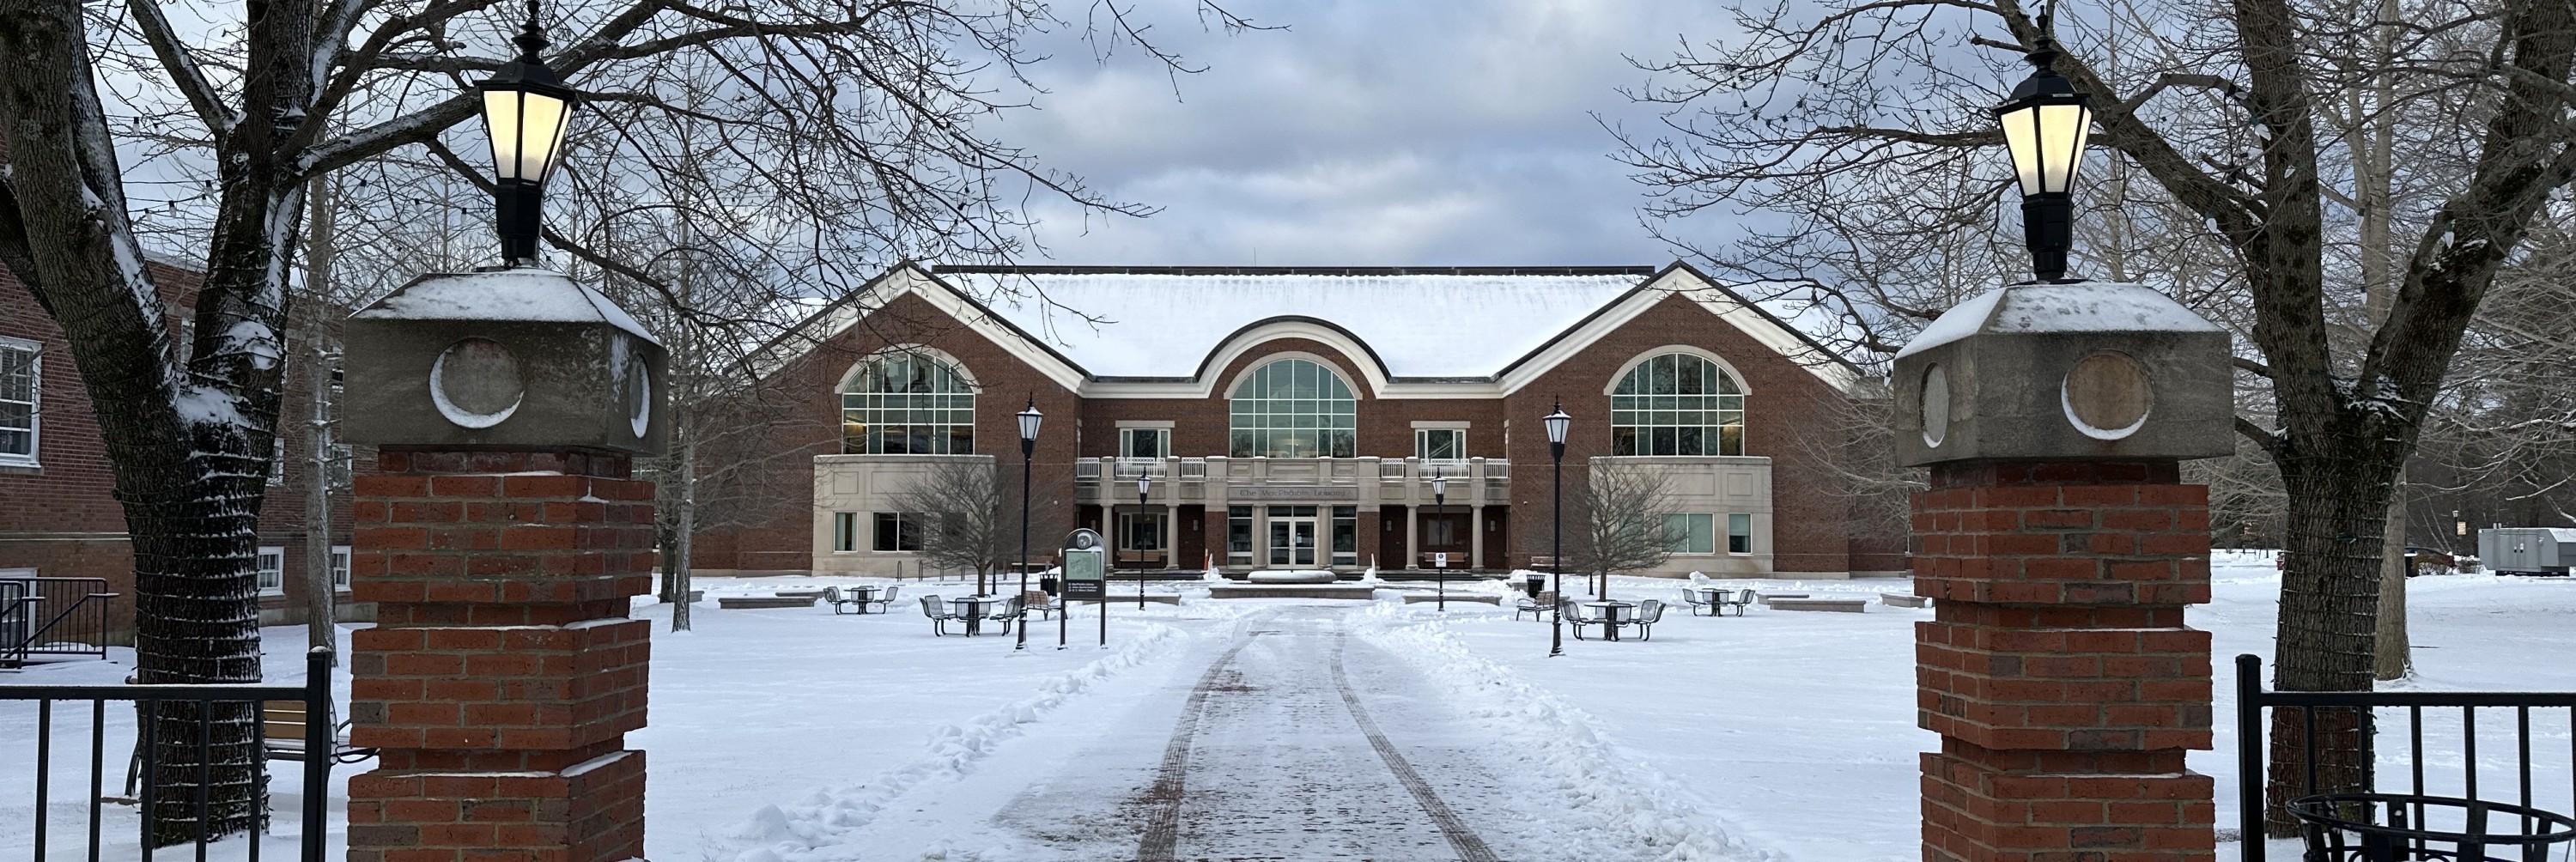 Exterior of library in the snow